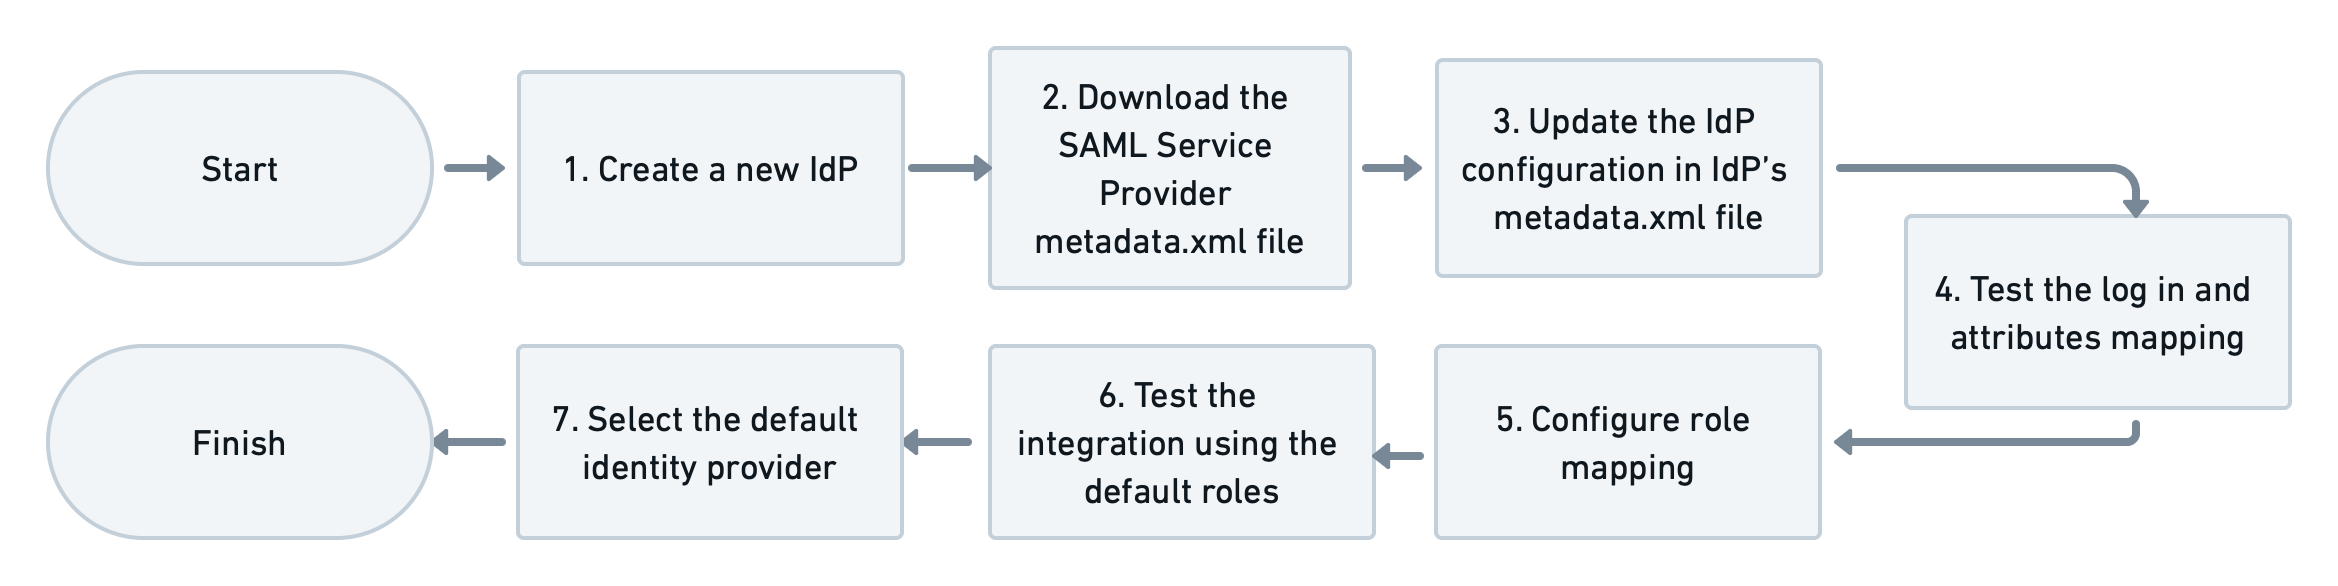 Graphic depicting the seven step process for implementing SAML SSO: 1. Create a new IdP, 2. Download the SAML Service Provider metadata.xml file, 3. Update the IdP configuration in IdPs metadata.xml file, 4. Test the log in and attributes mapping, 5. Configure role mapping, 6. Test the integration using the default roles, 7. Select the default identity provider